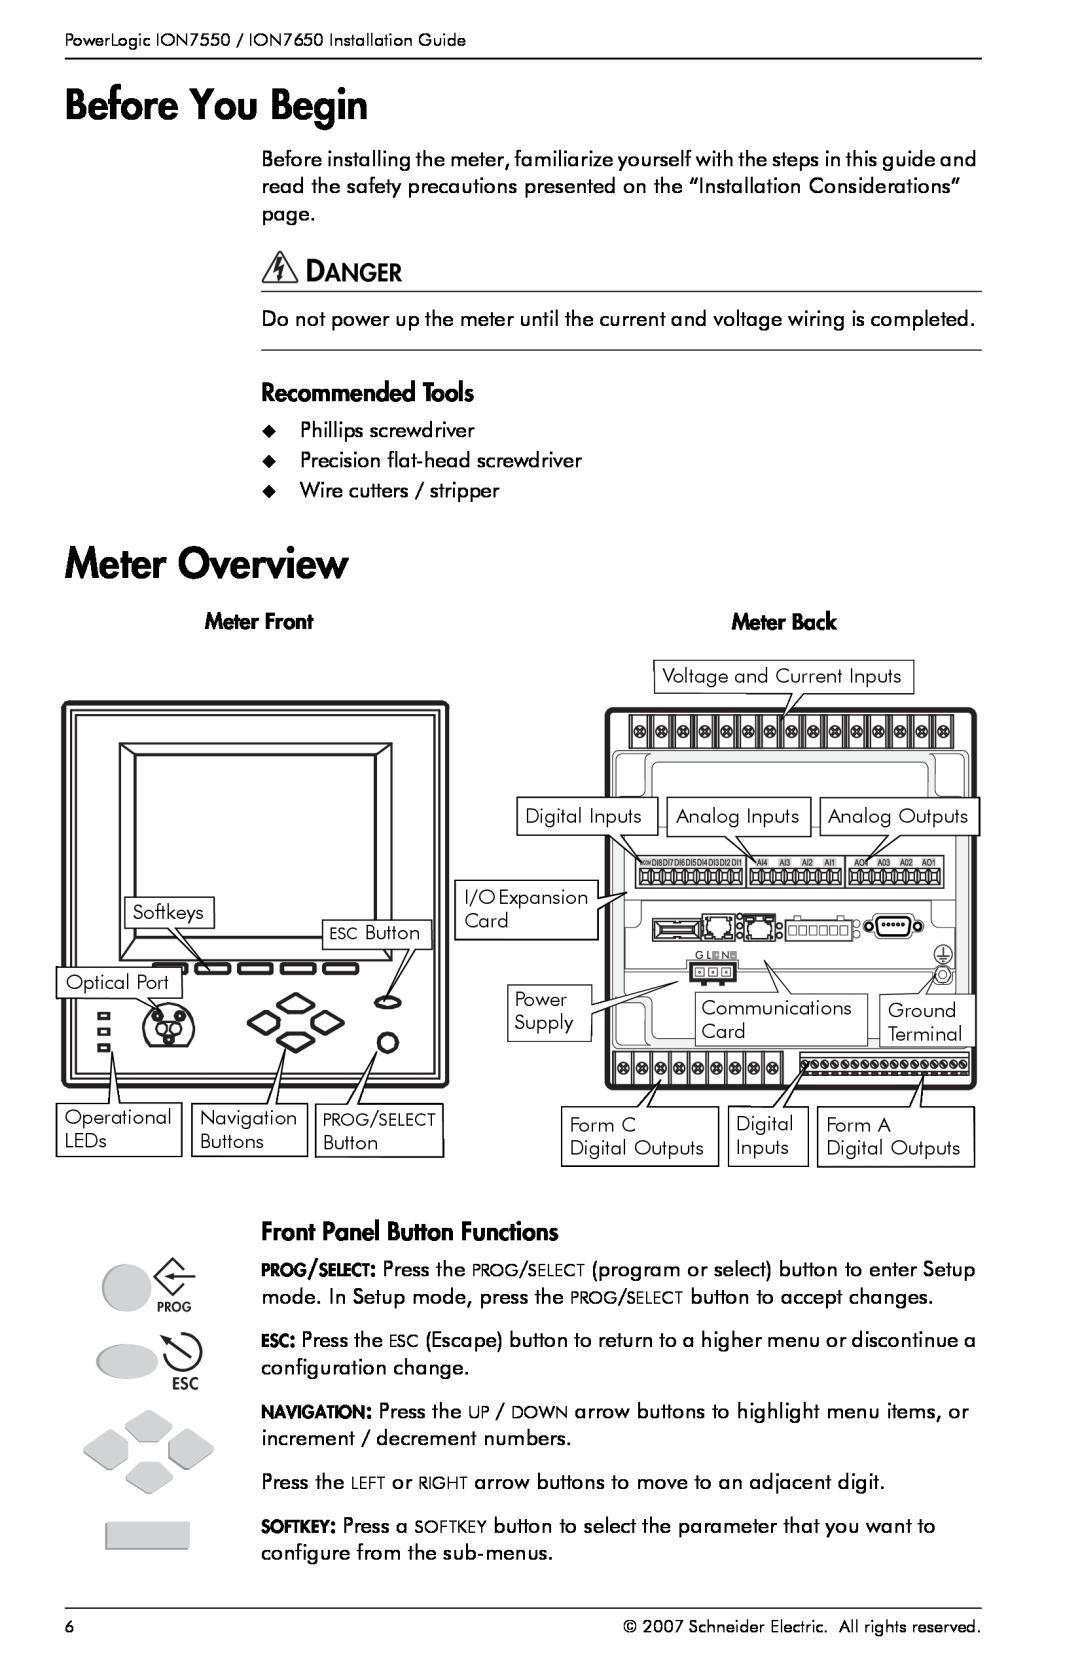 Schneider Electric ION7650 manual Before You Begin, Meter Overview, Recommended Tools, Front Panel Button Functions, Danger 